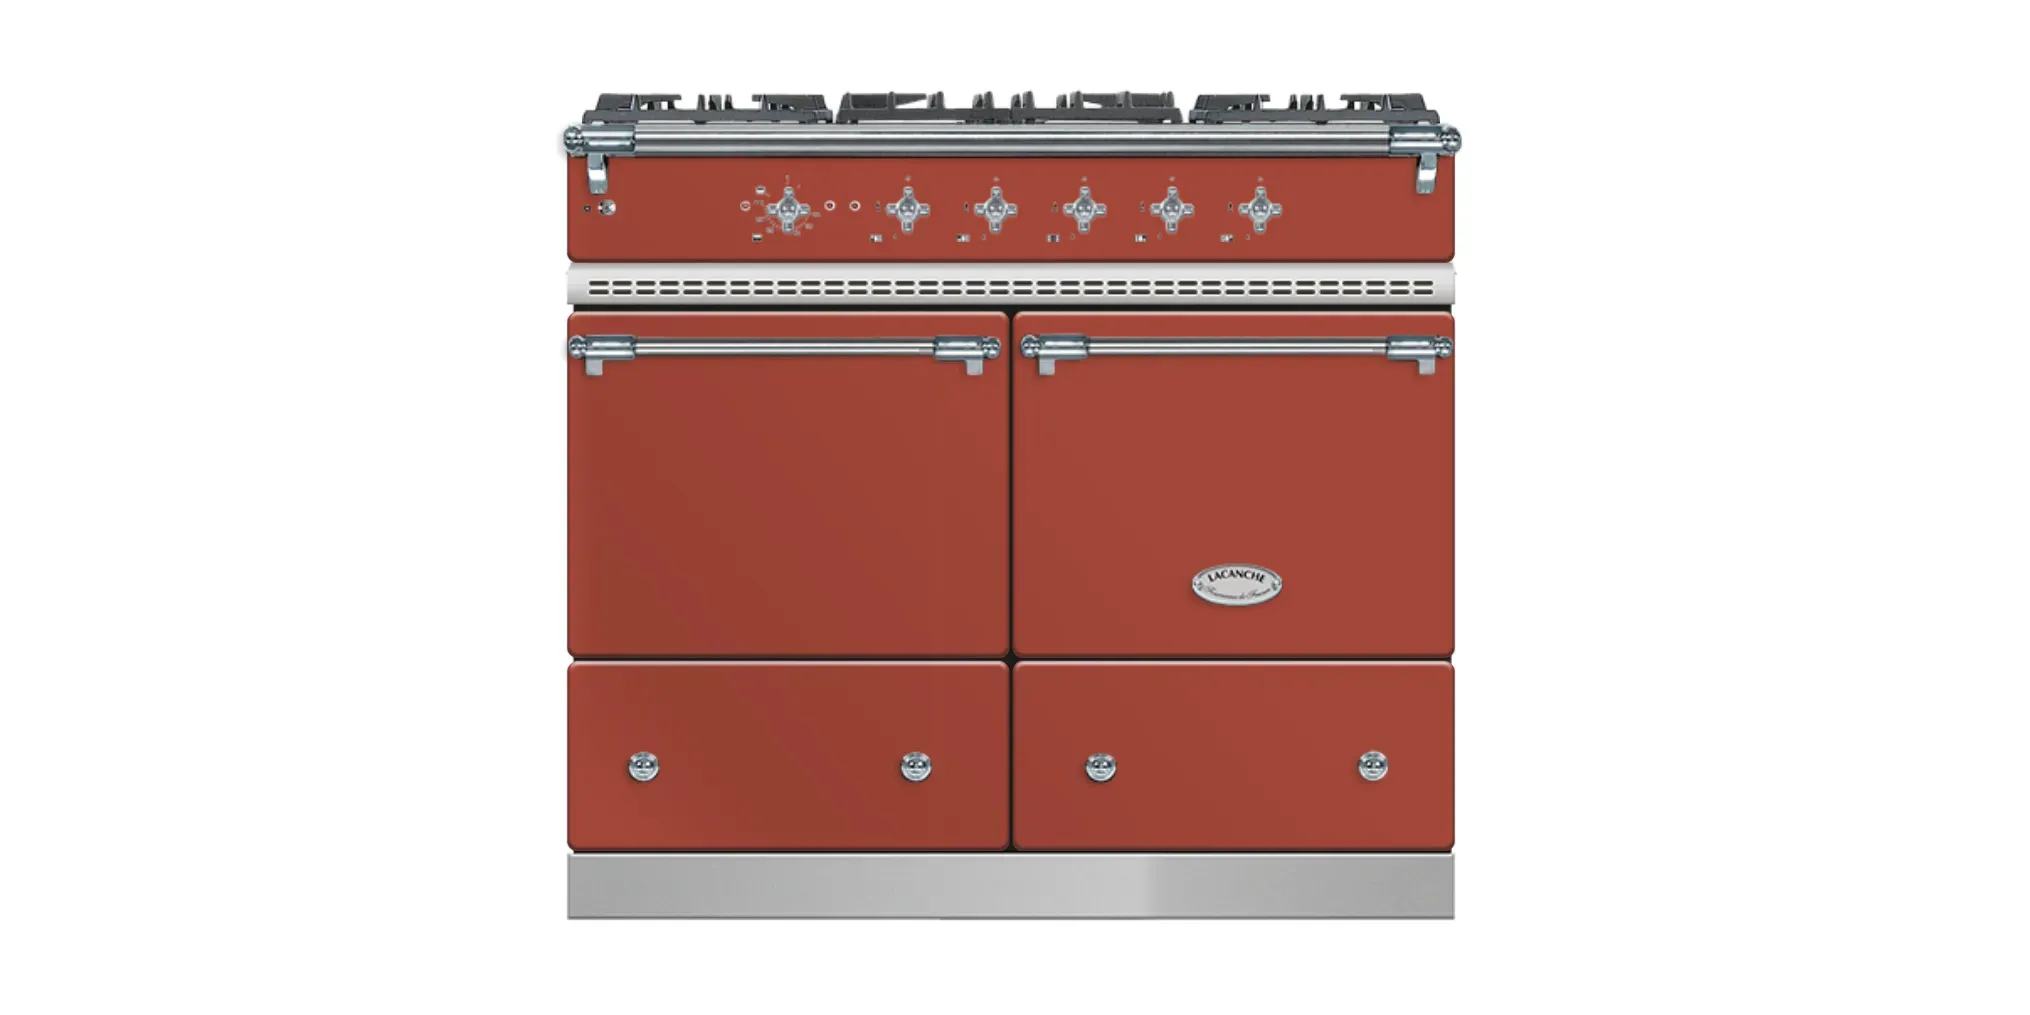 Lacanche Cluny 1000cm Wide Range Cooker